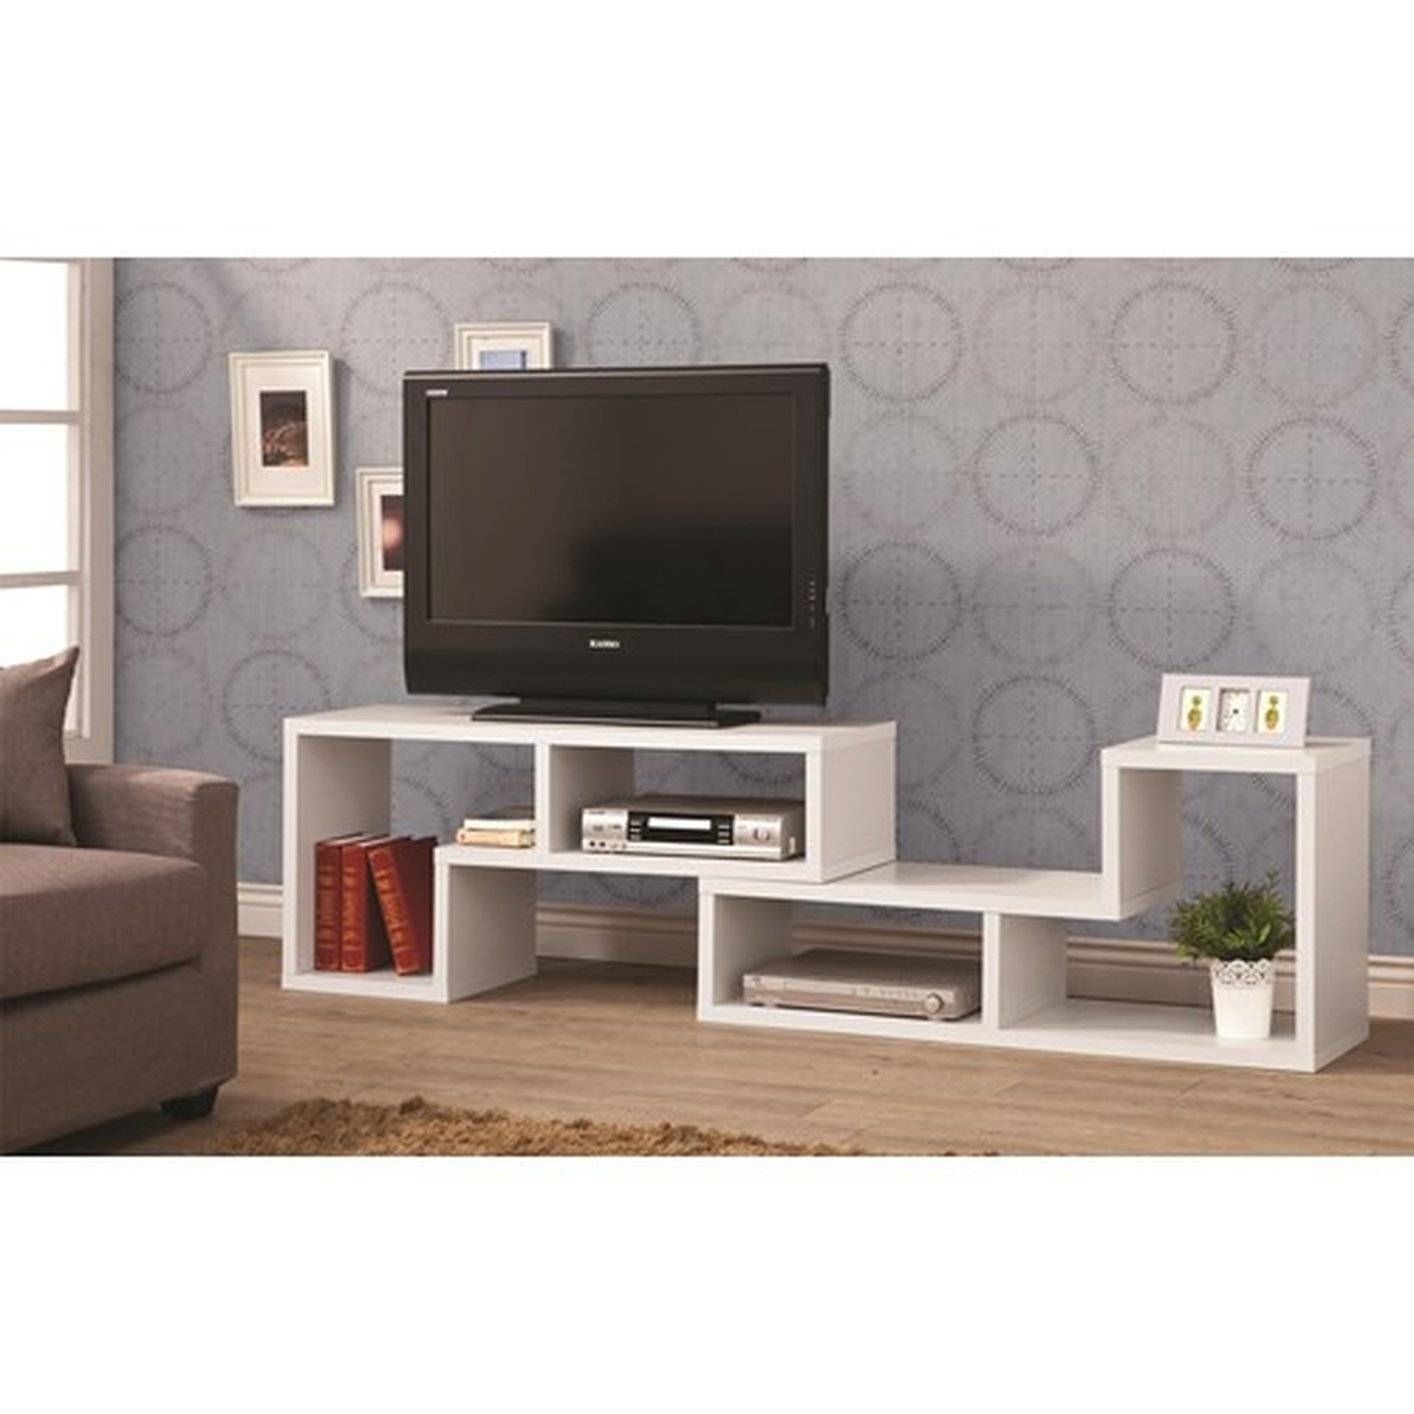 White Wood Tv Stand – Steal A Sofa Furniture Outlet Los Angeles Ca Within White Wood Tv Stands (View 3 of 15)